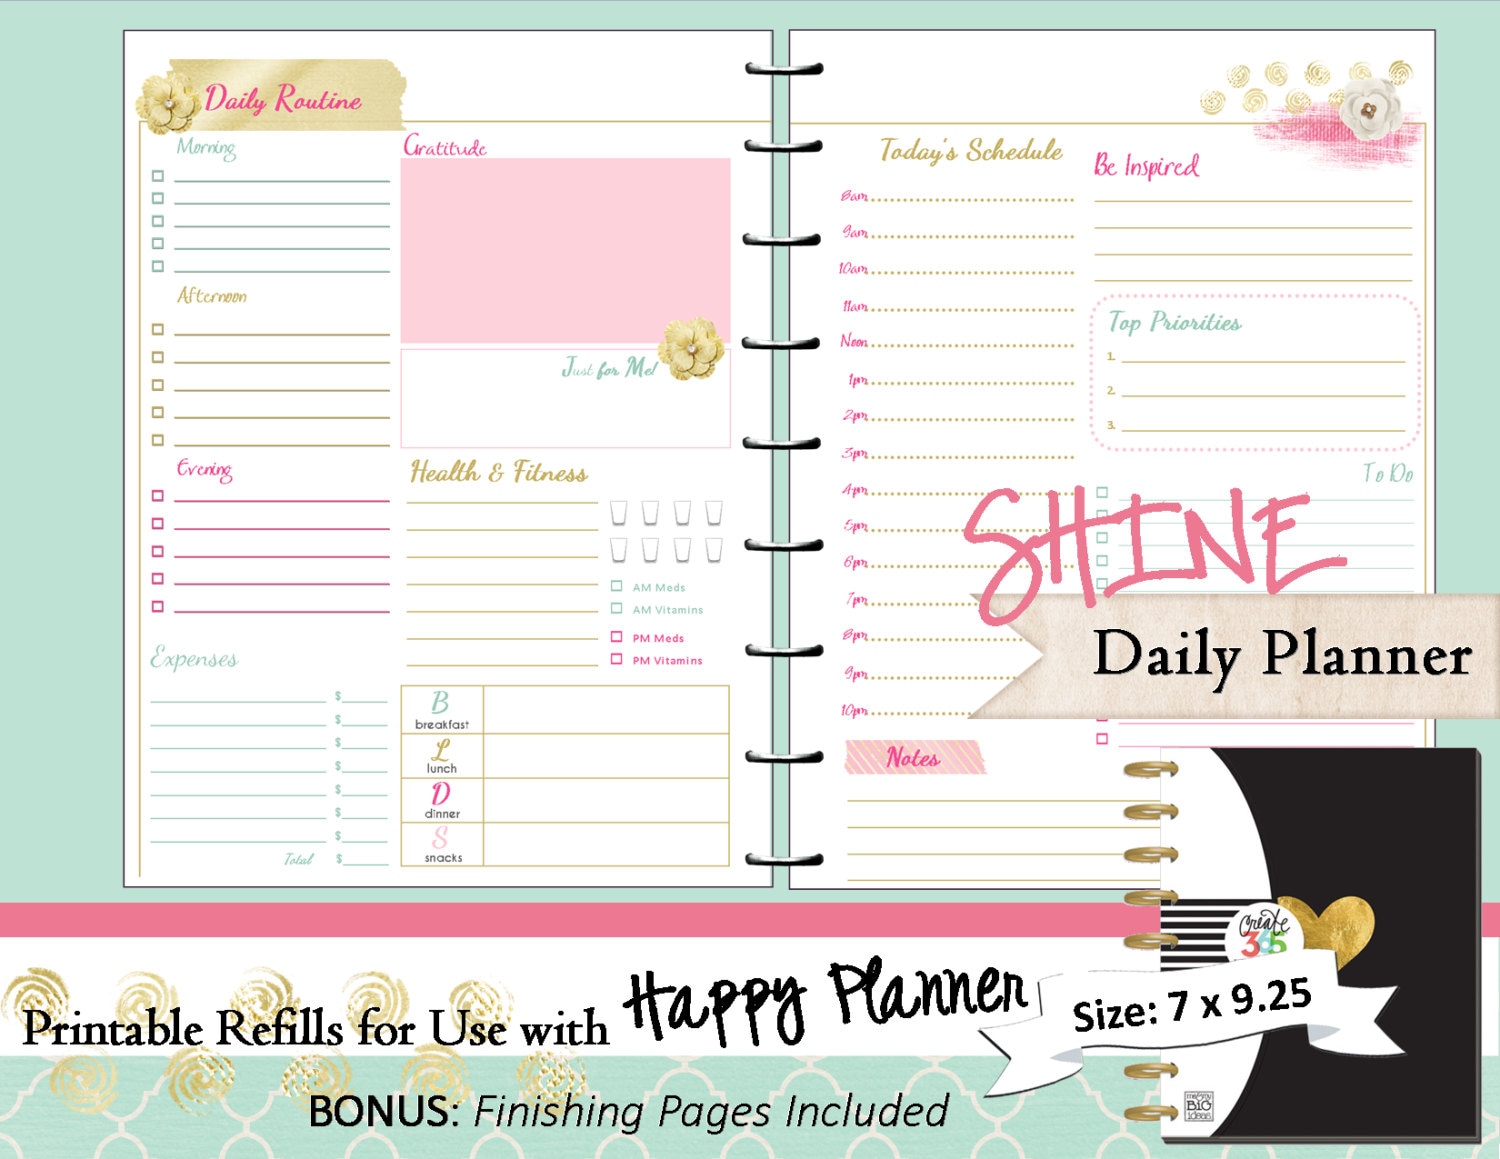 happy-planner-printables-customize-and-print